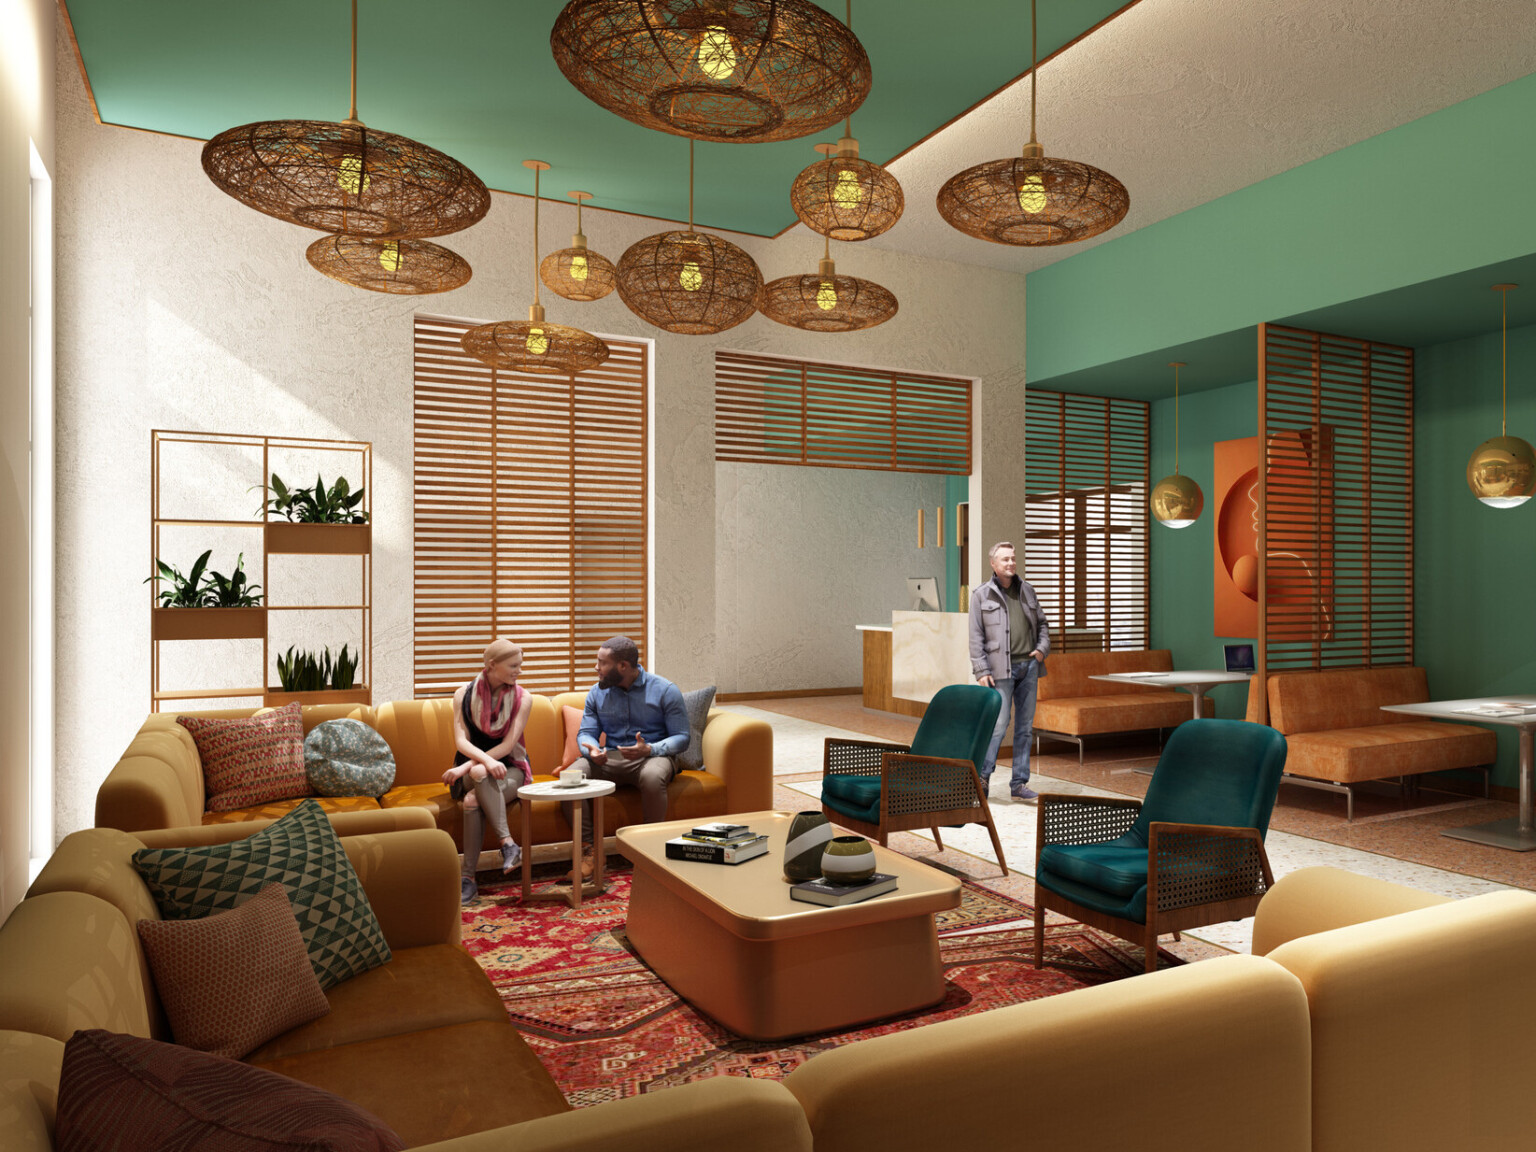 An interior render of a cozy university lounge or common area. The overall ambiance is relaxed and comfortable, encouraging social interaction and informal gatherings